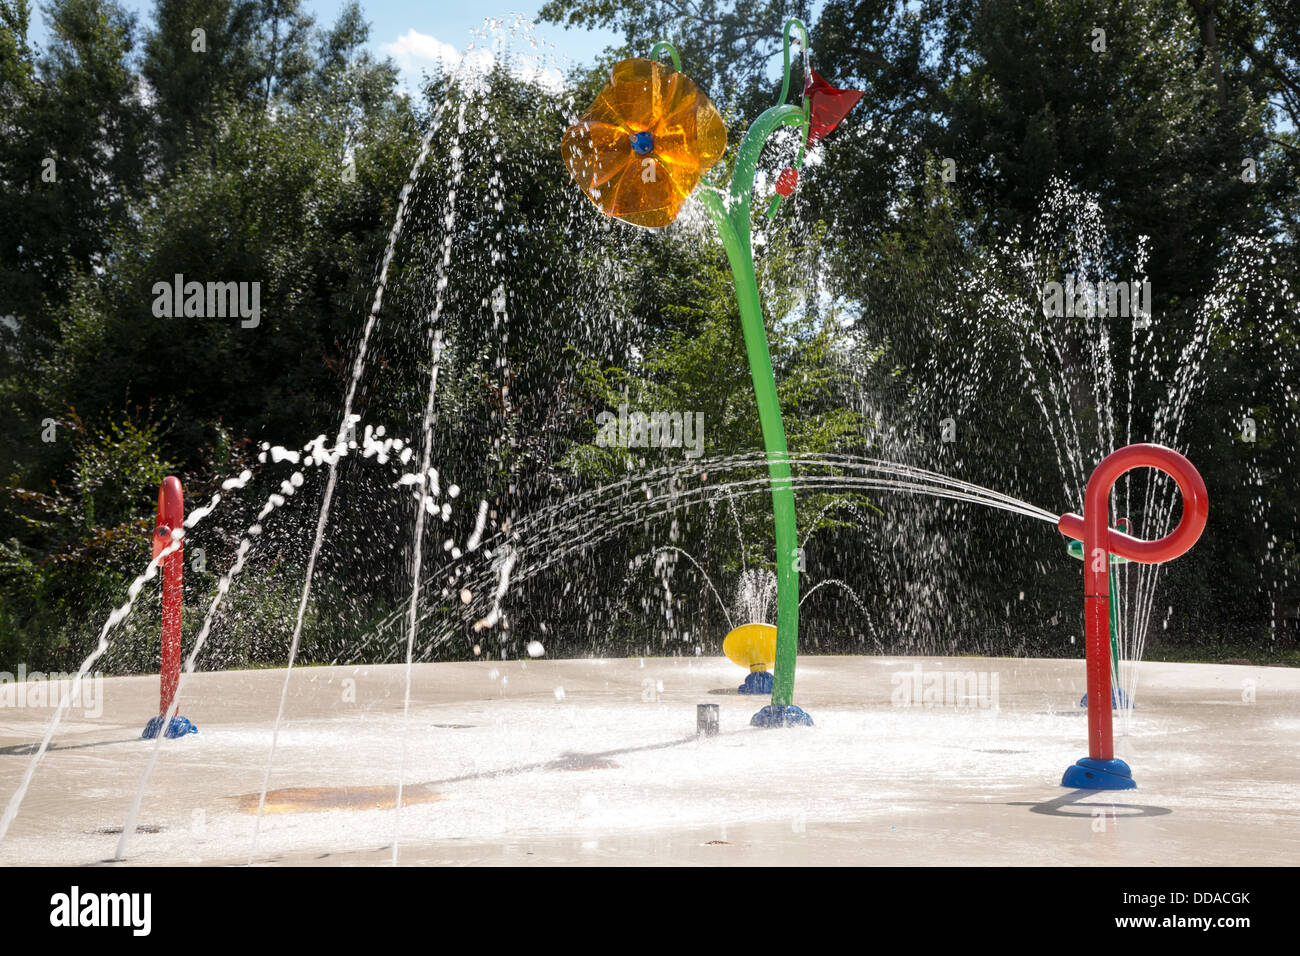 Water garden with trick fountains at public swimming pool Stock Photo